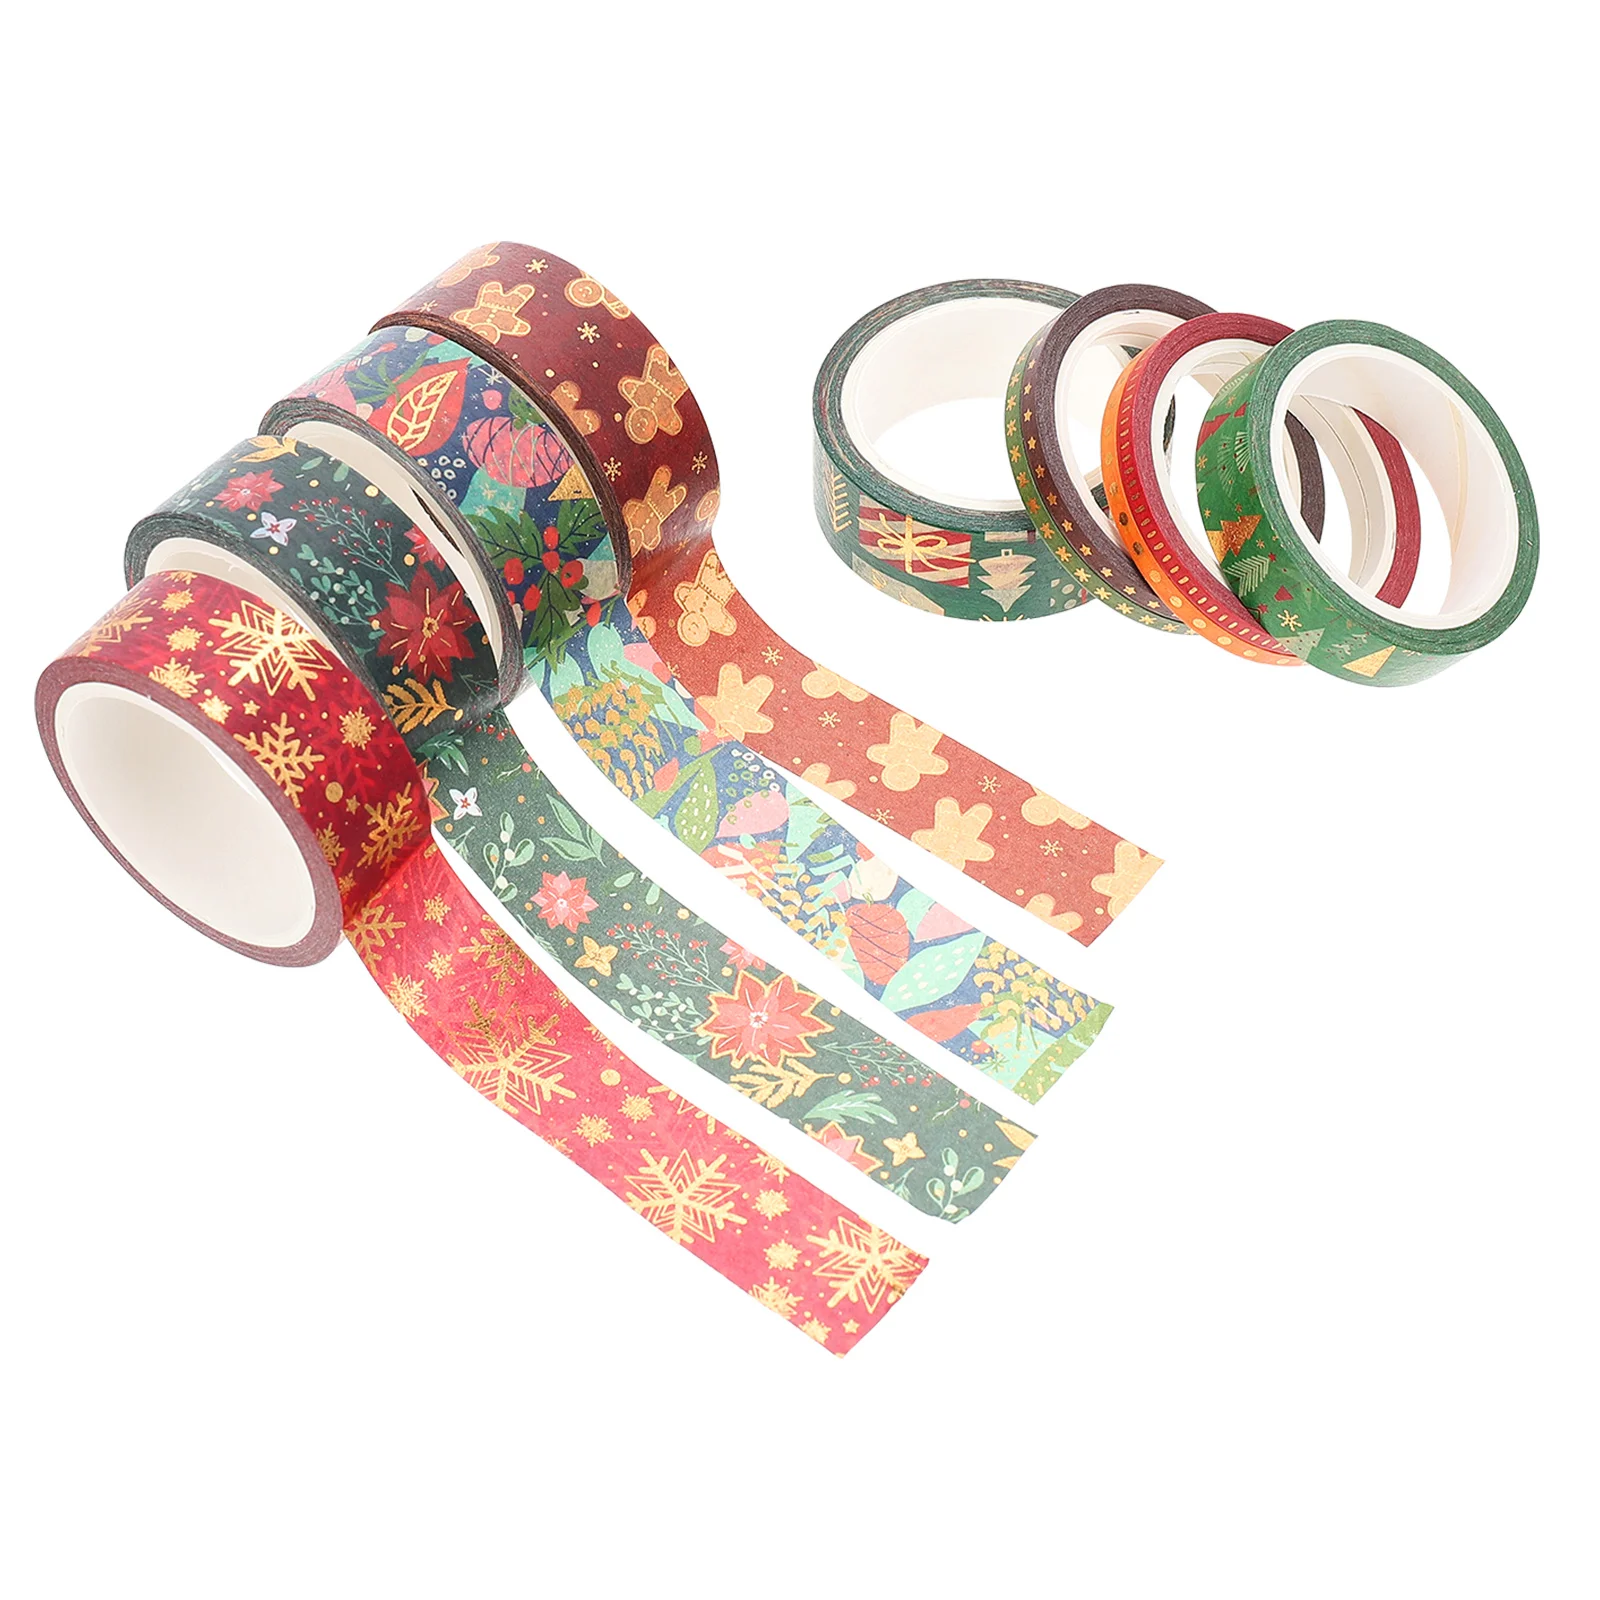 

21 Rolls Christmas Washi Tape Decal Stickers Party Supplies Winter Gift Wrapping Themed Tapes Adhesive Paper Japanese Xmas DIY